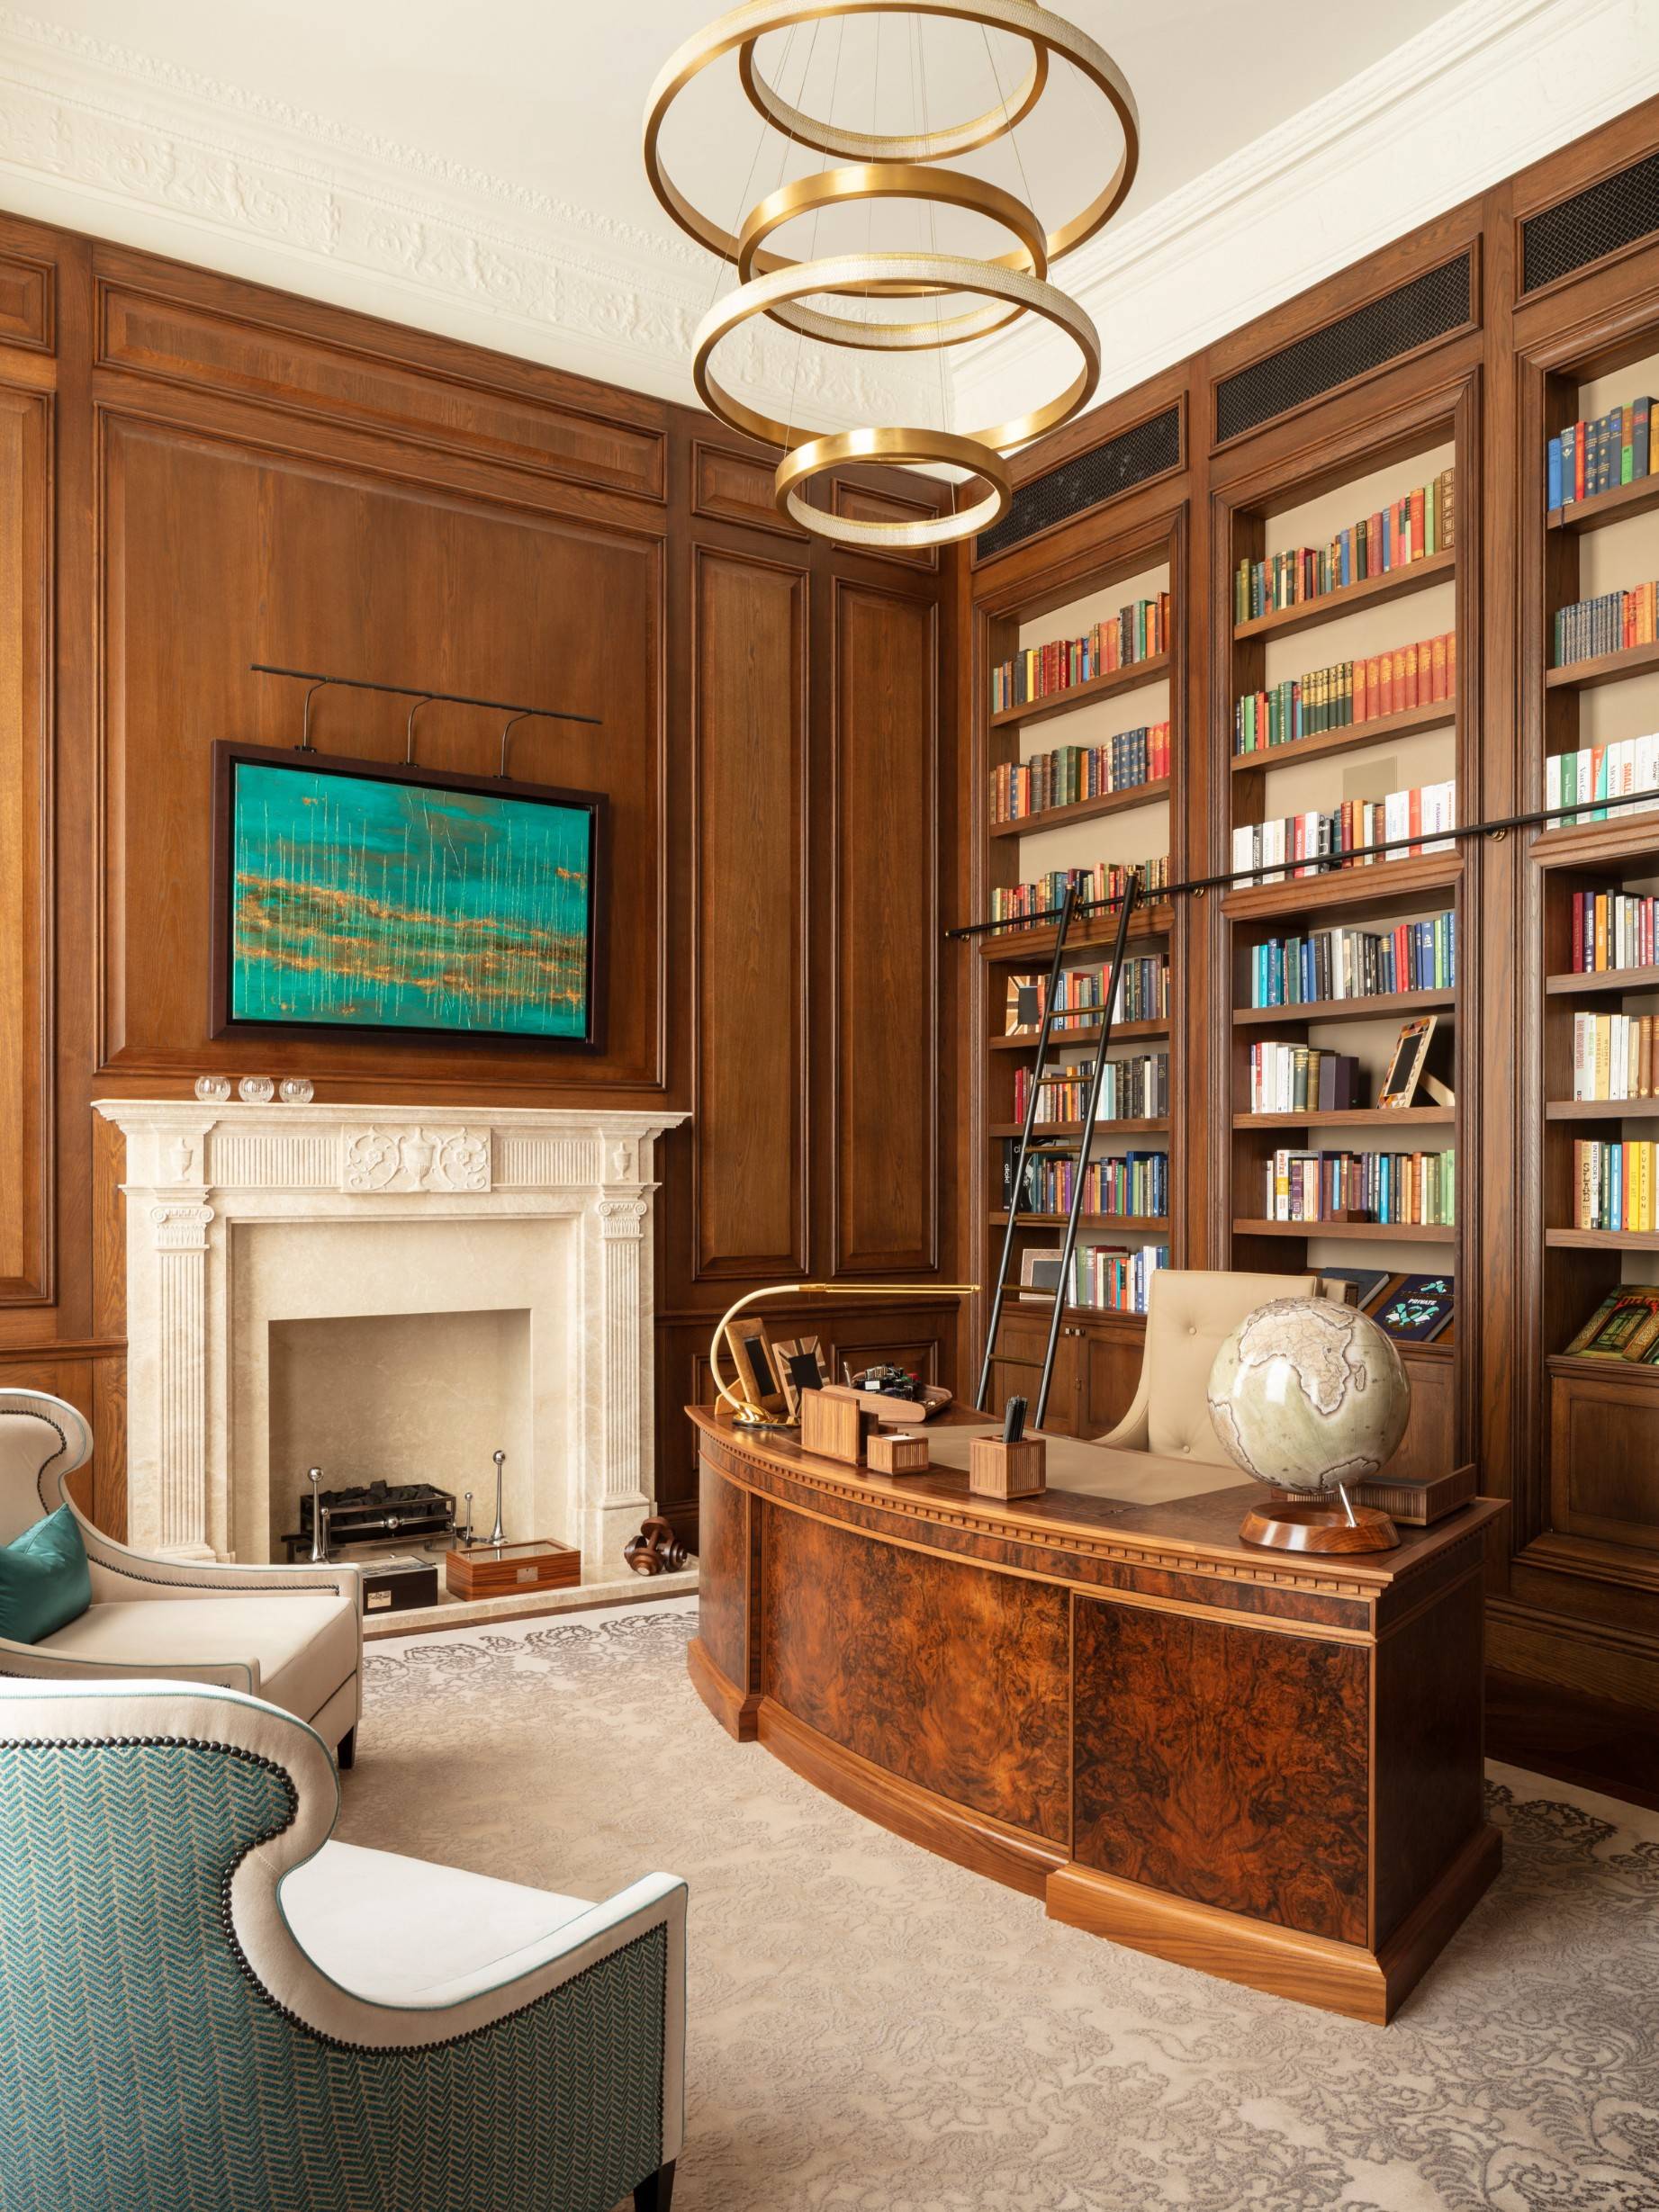 LINLEY Interiors: Exquisitely designed interiors with an unassailable British pedigree.